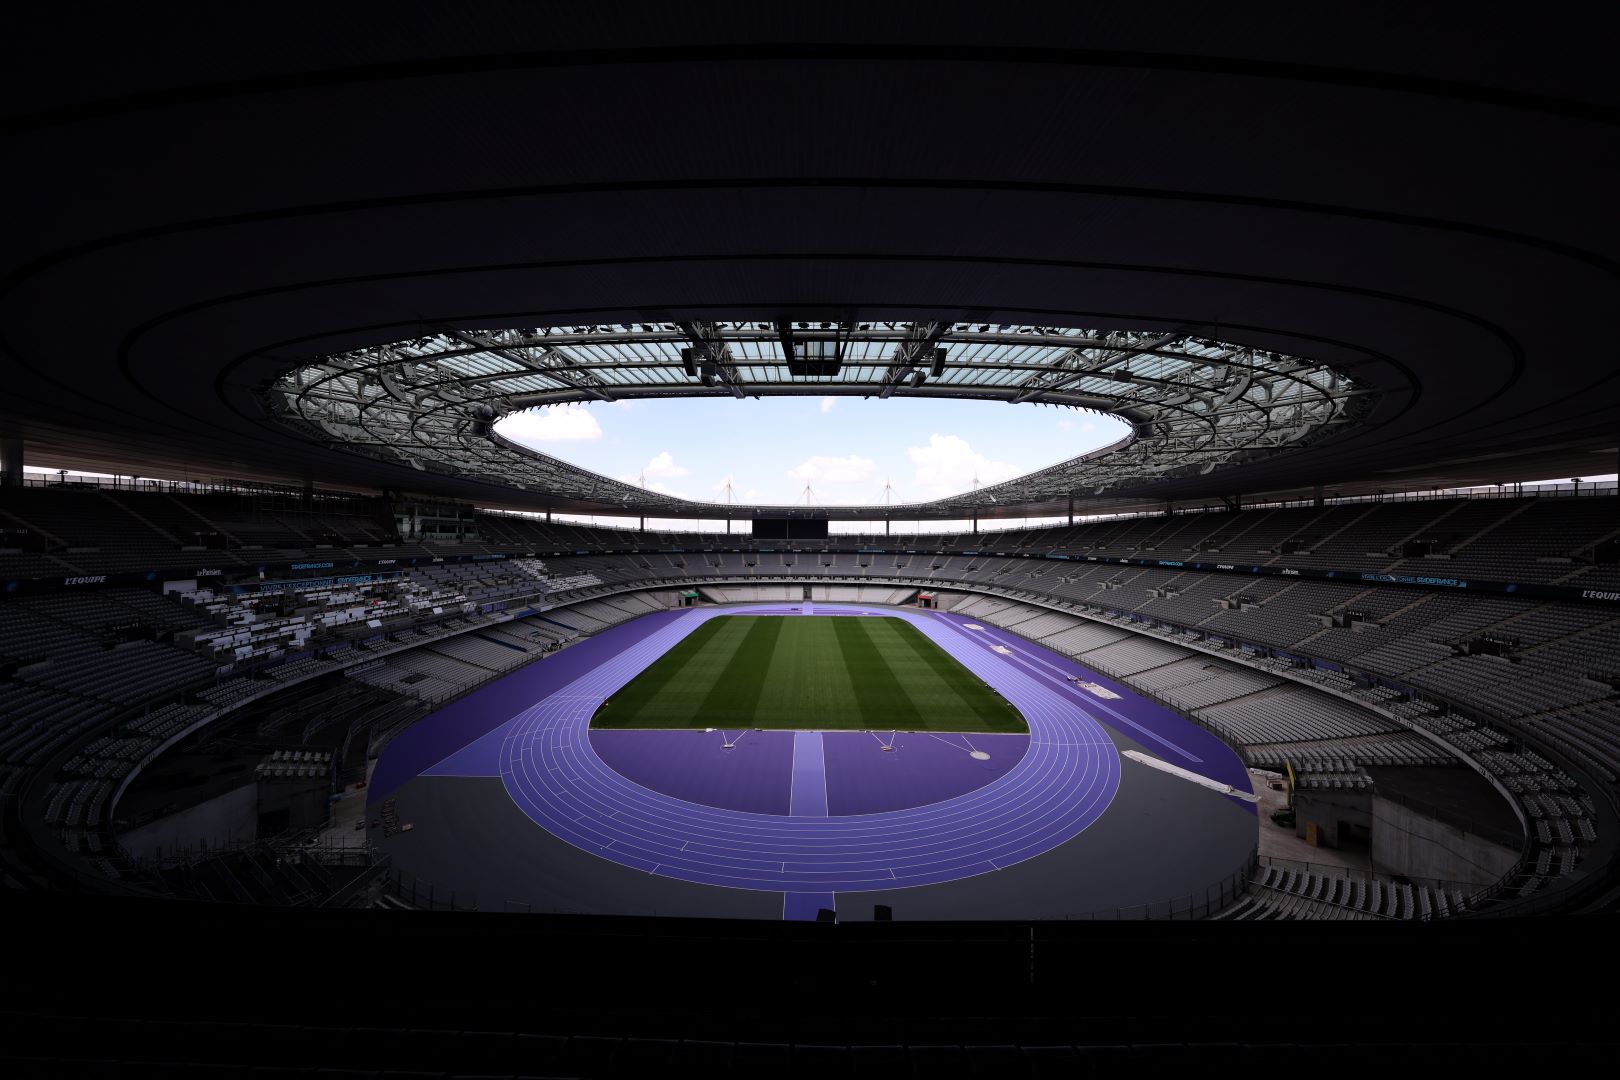 A view of the purple track of the Stade de France in Paris